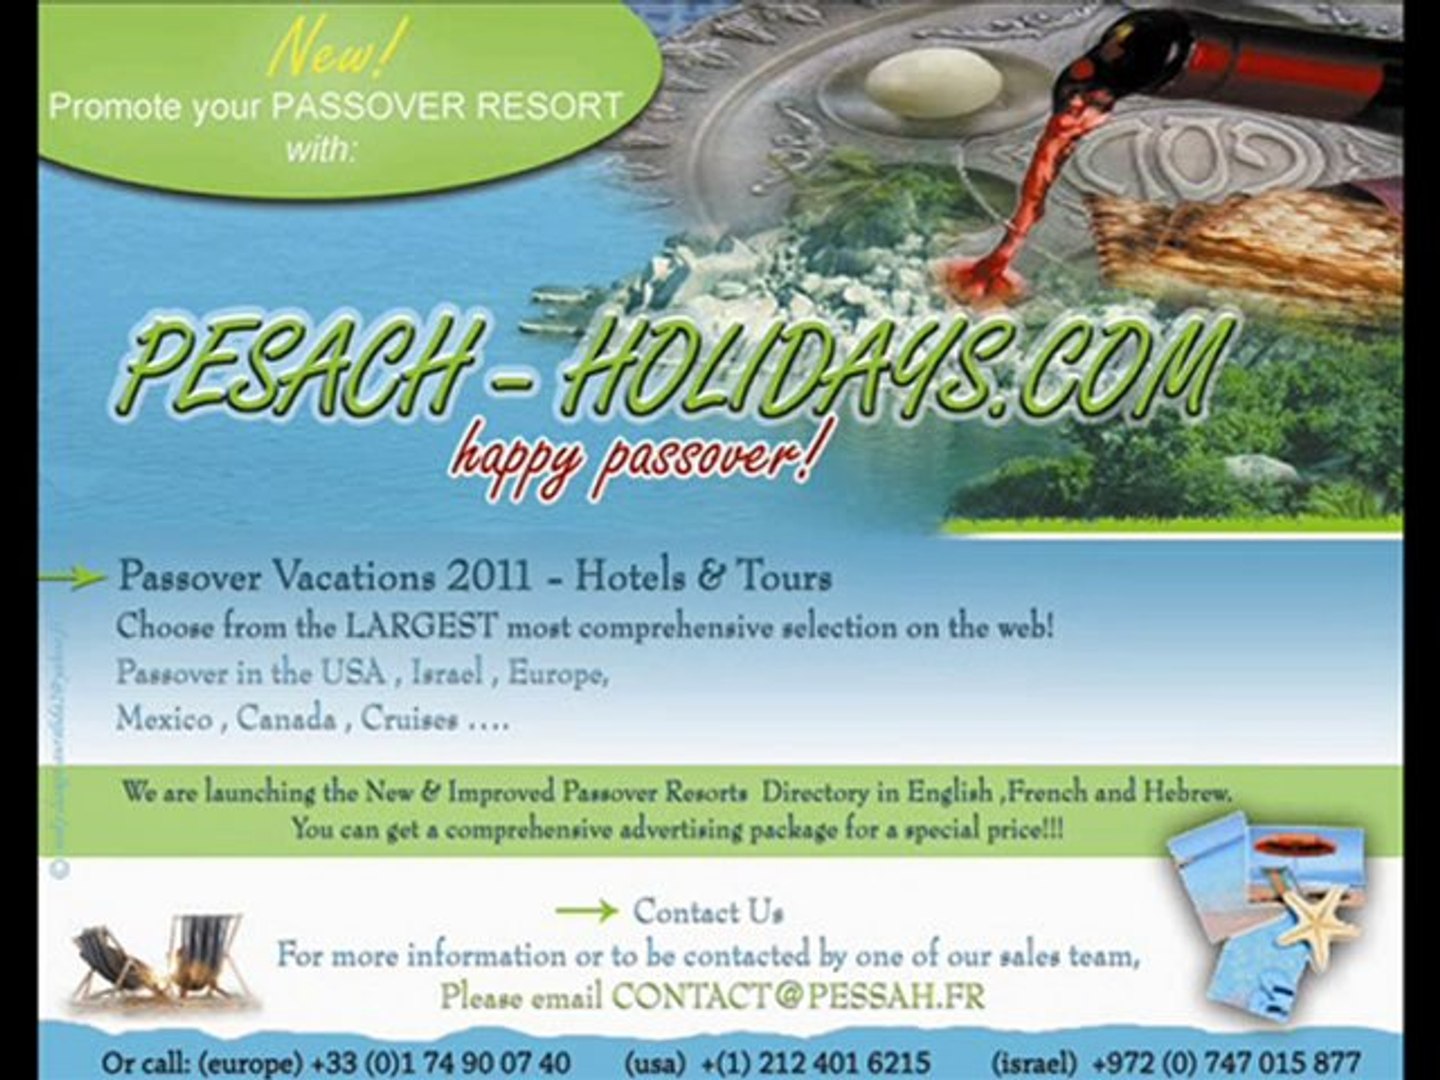 PESACH VACATIONS ISRAEL 2013 passover israel holidays israel hotels pesach deals